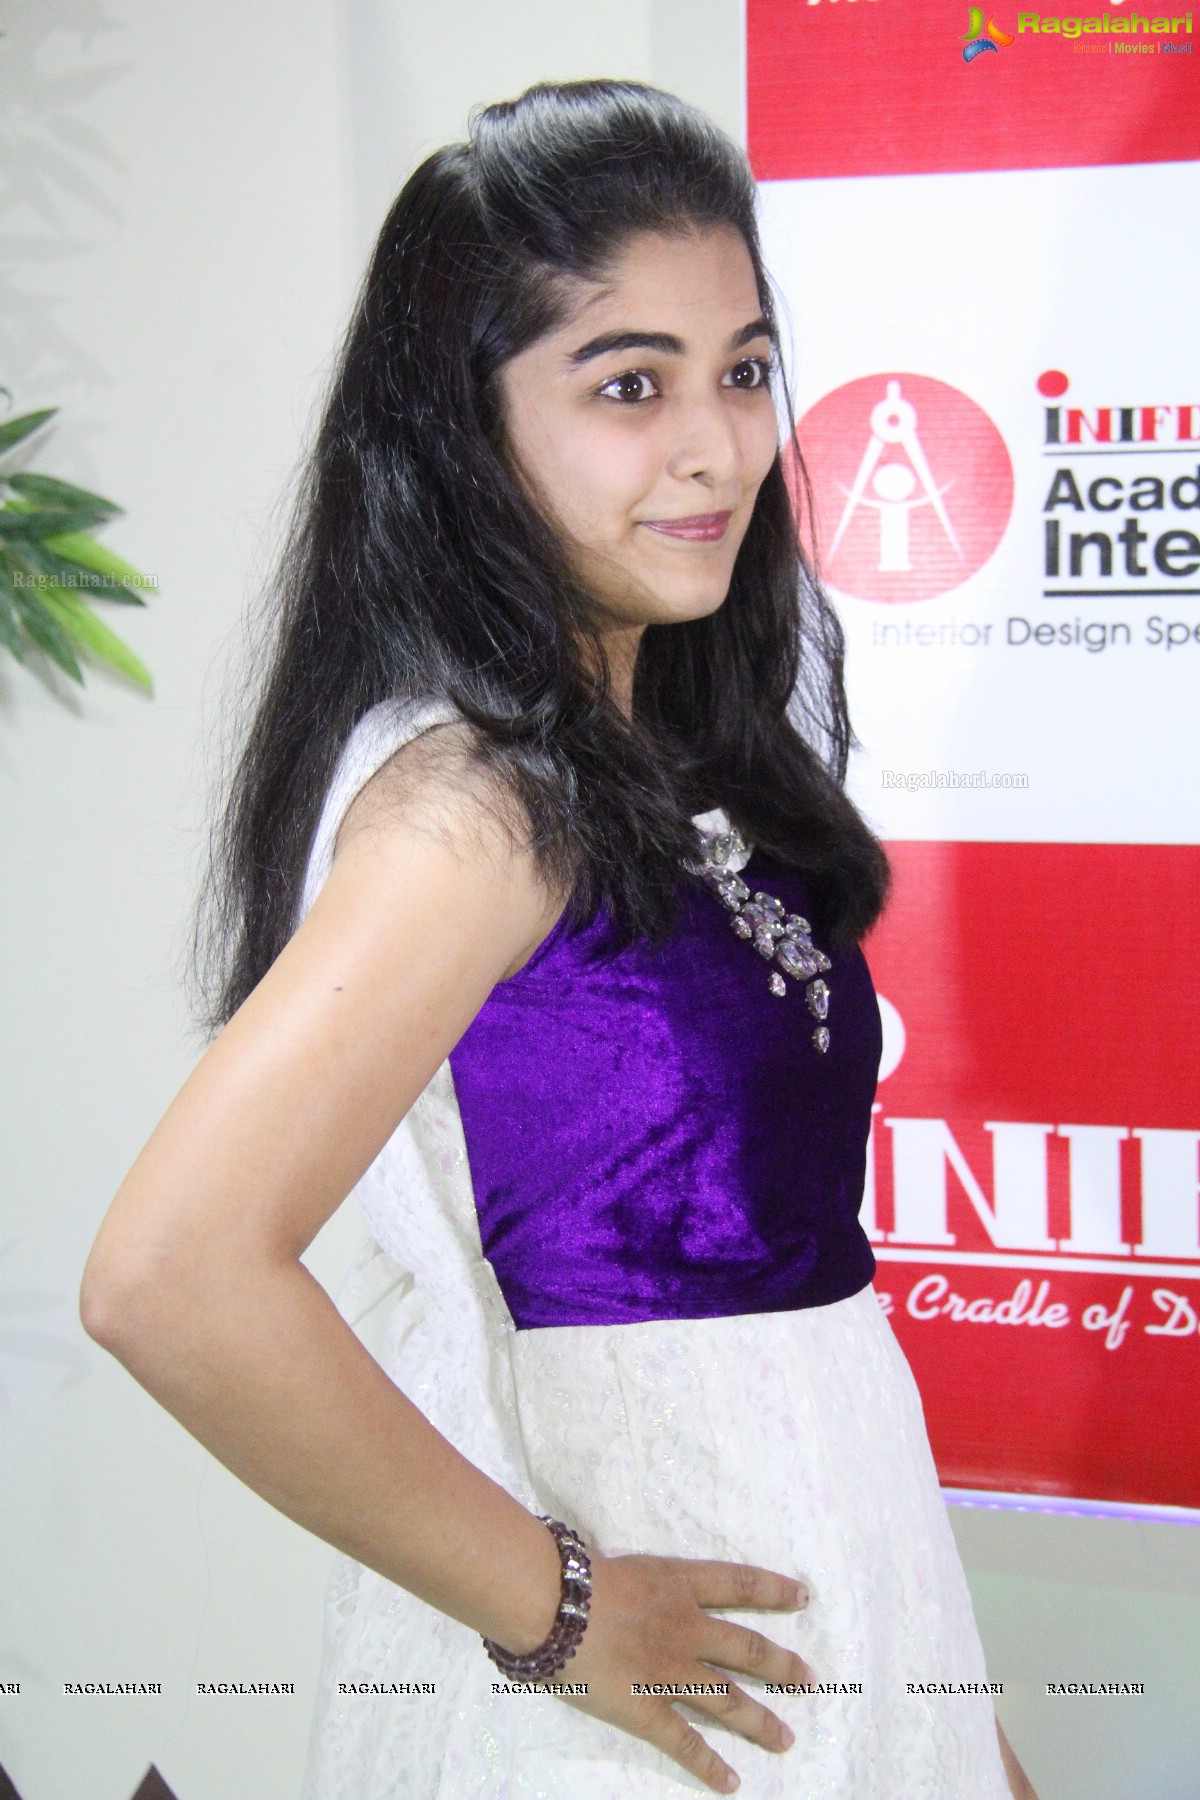 INIFD Academy of Interiors Launch, Hyderabad